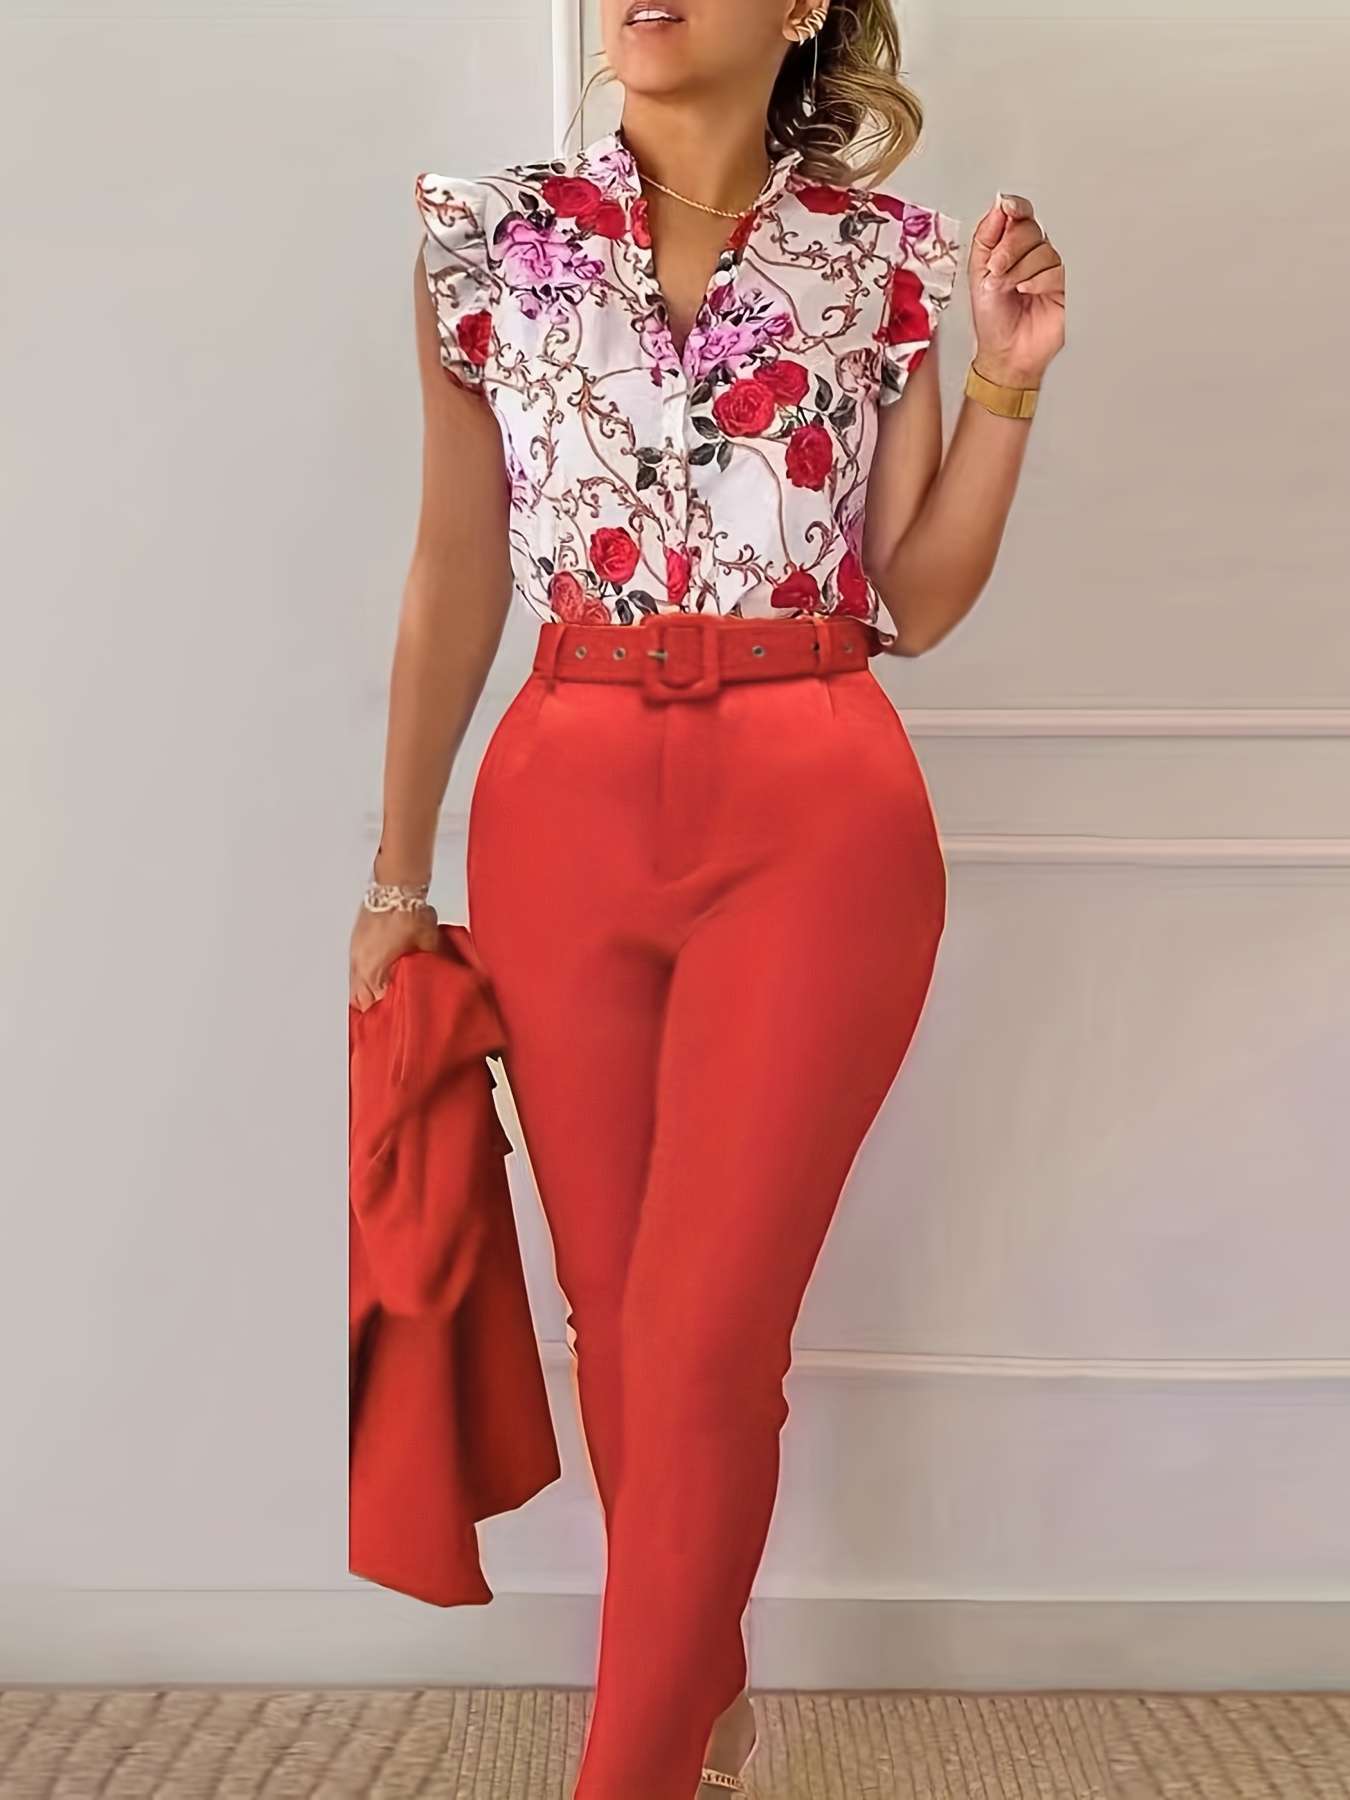 Womens Red Pants, Everyday Low Prices